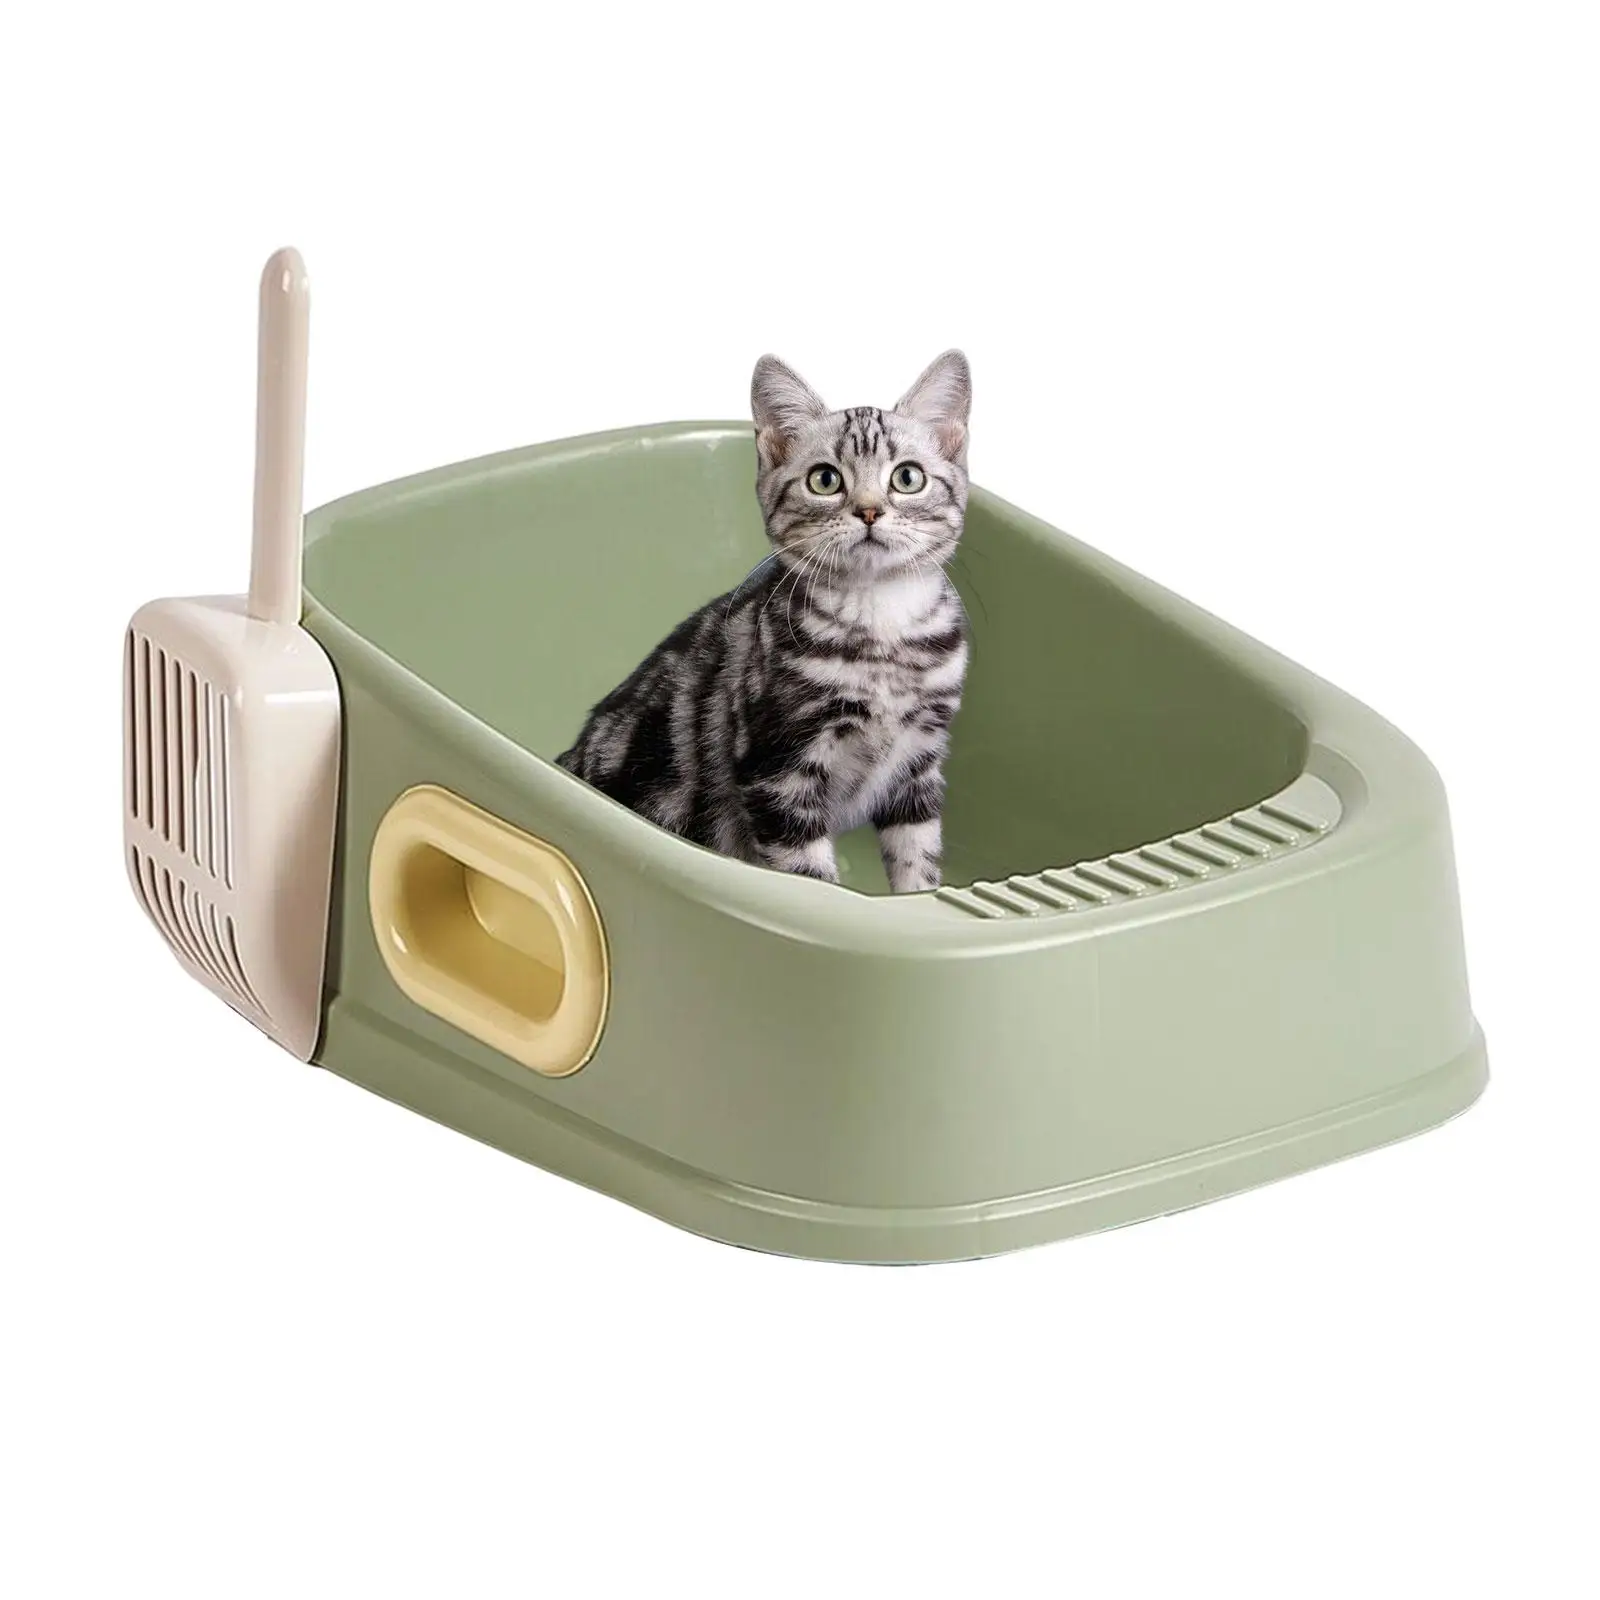 Pet Cat Litter Box Prevent Sand Leakage Sturdy with Spoon Pet Accessories Bedpan Kitty Litter Pan for All Kinds of Cat Litter